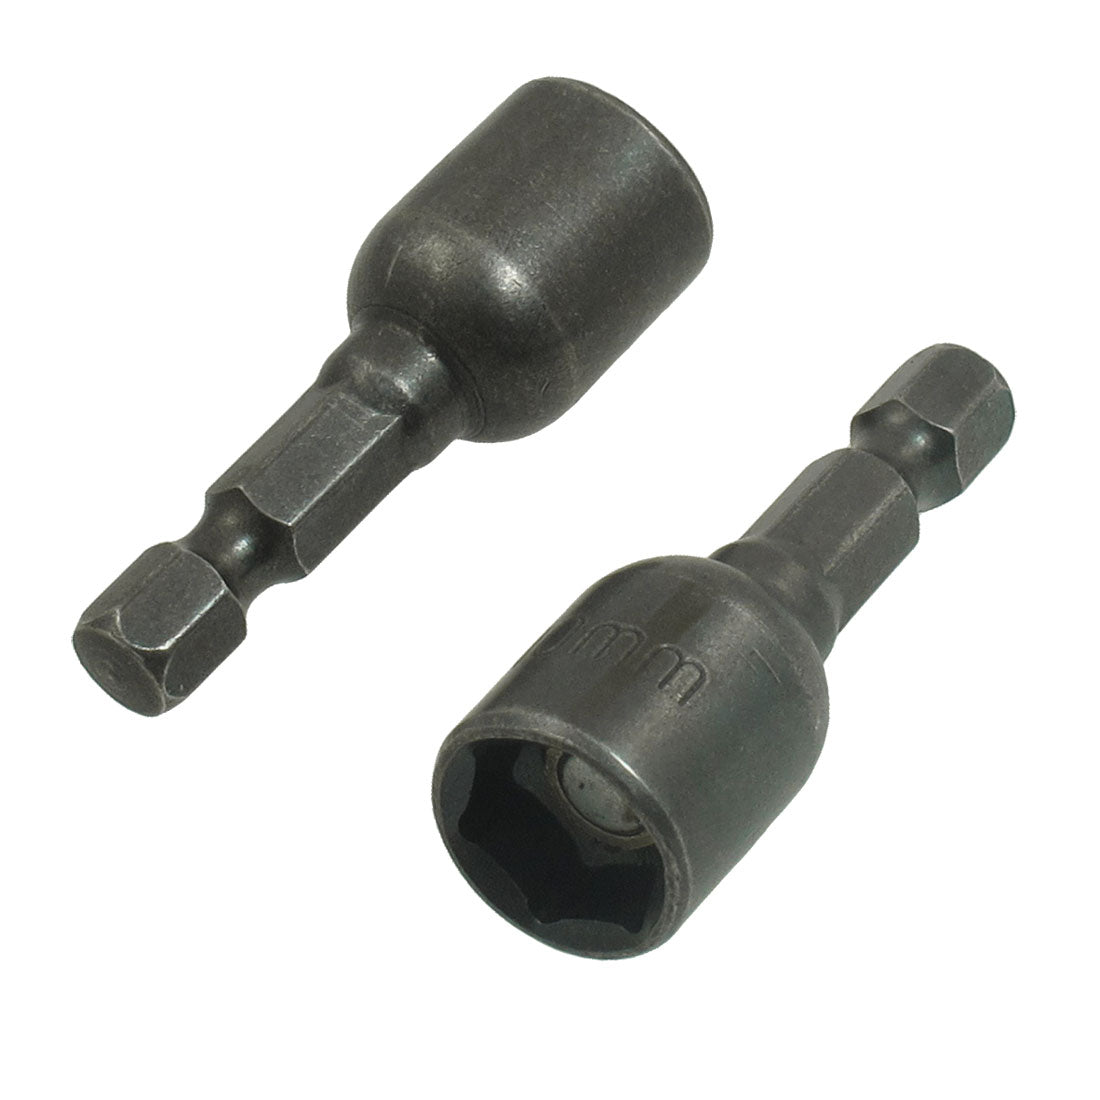 uxcell Uxcell 2 Pieces Gray Metal 0.4" 10mm Magnetic Hex Socket Spanner Nut Driver Bit